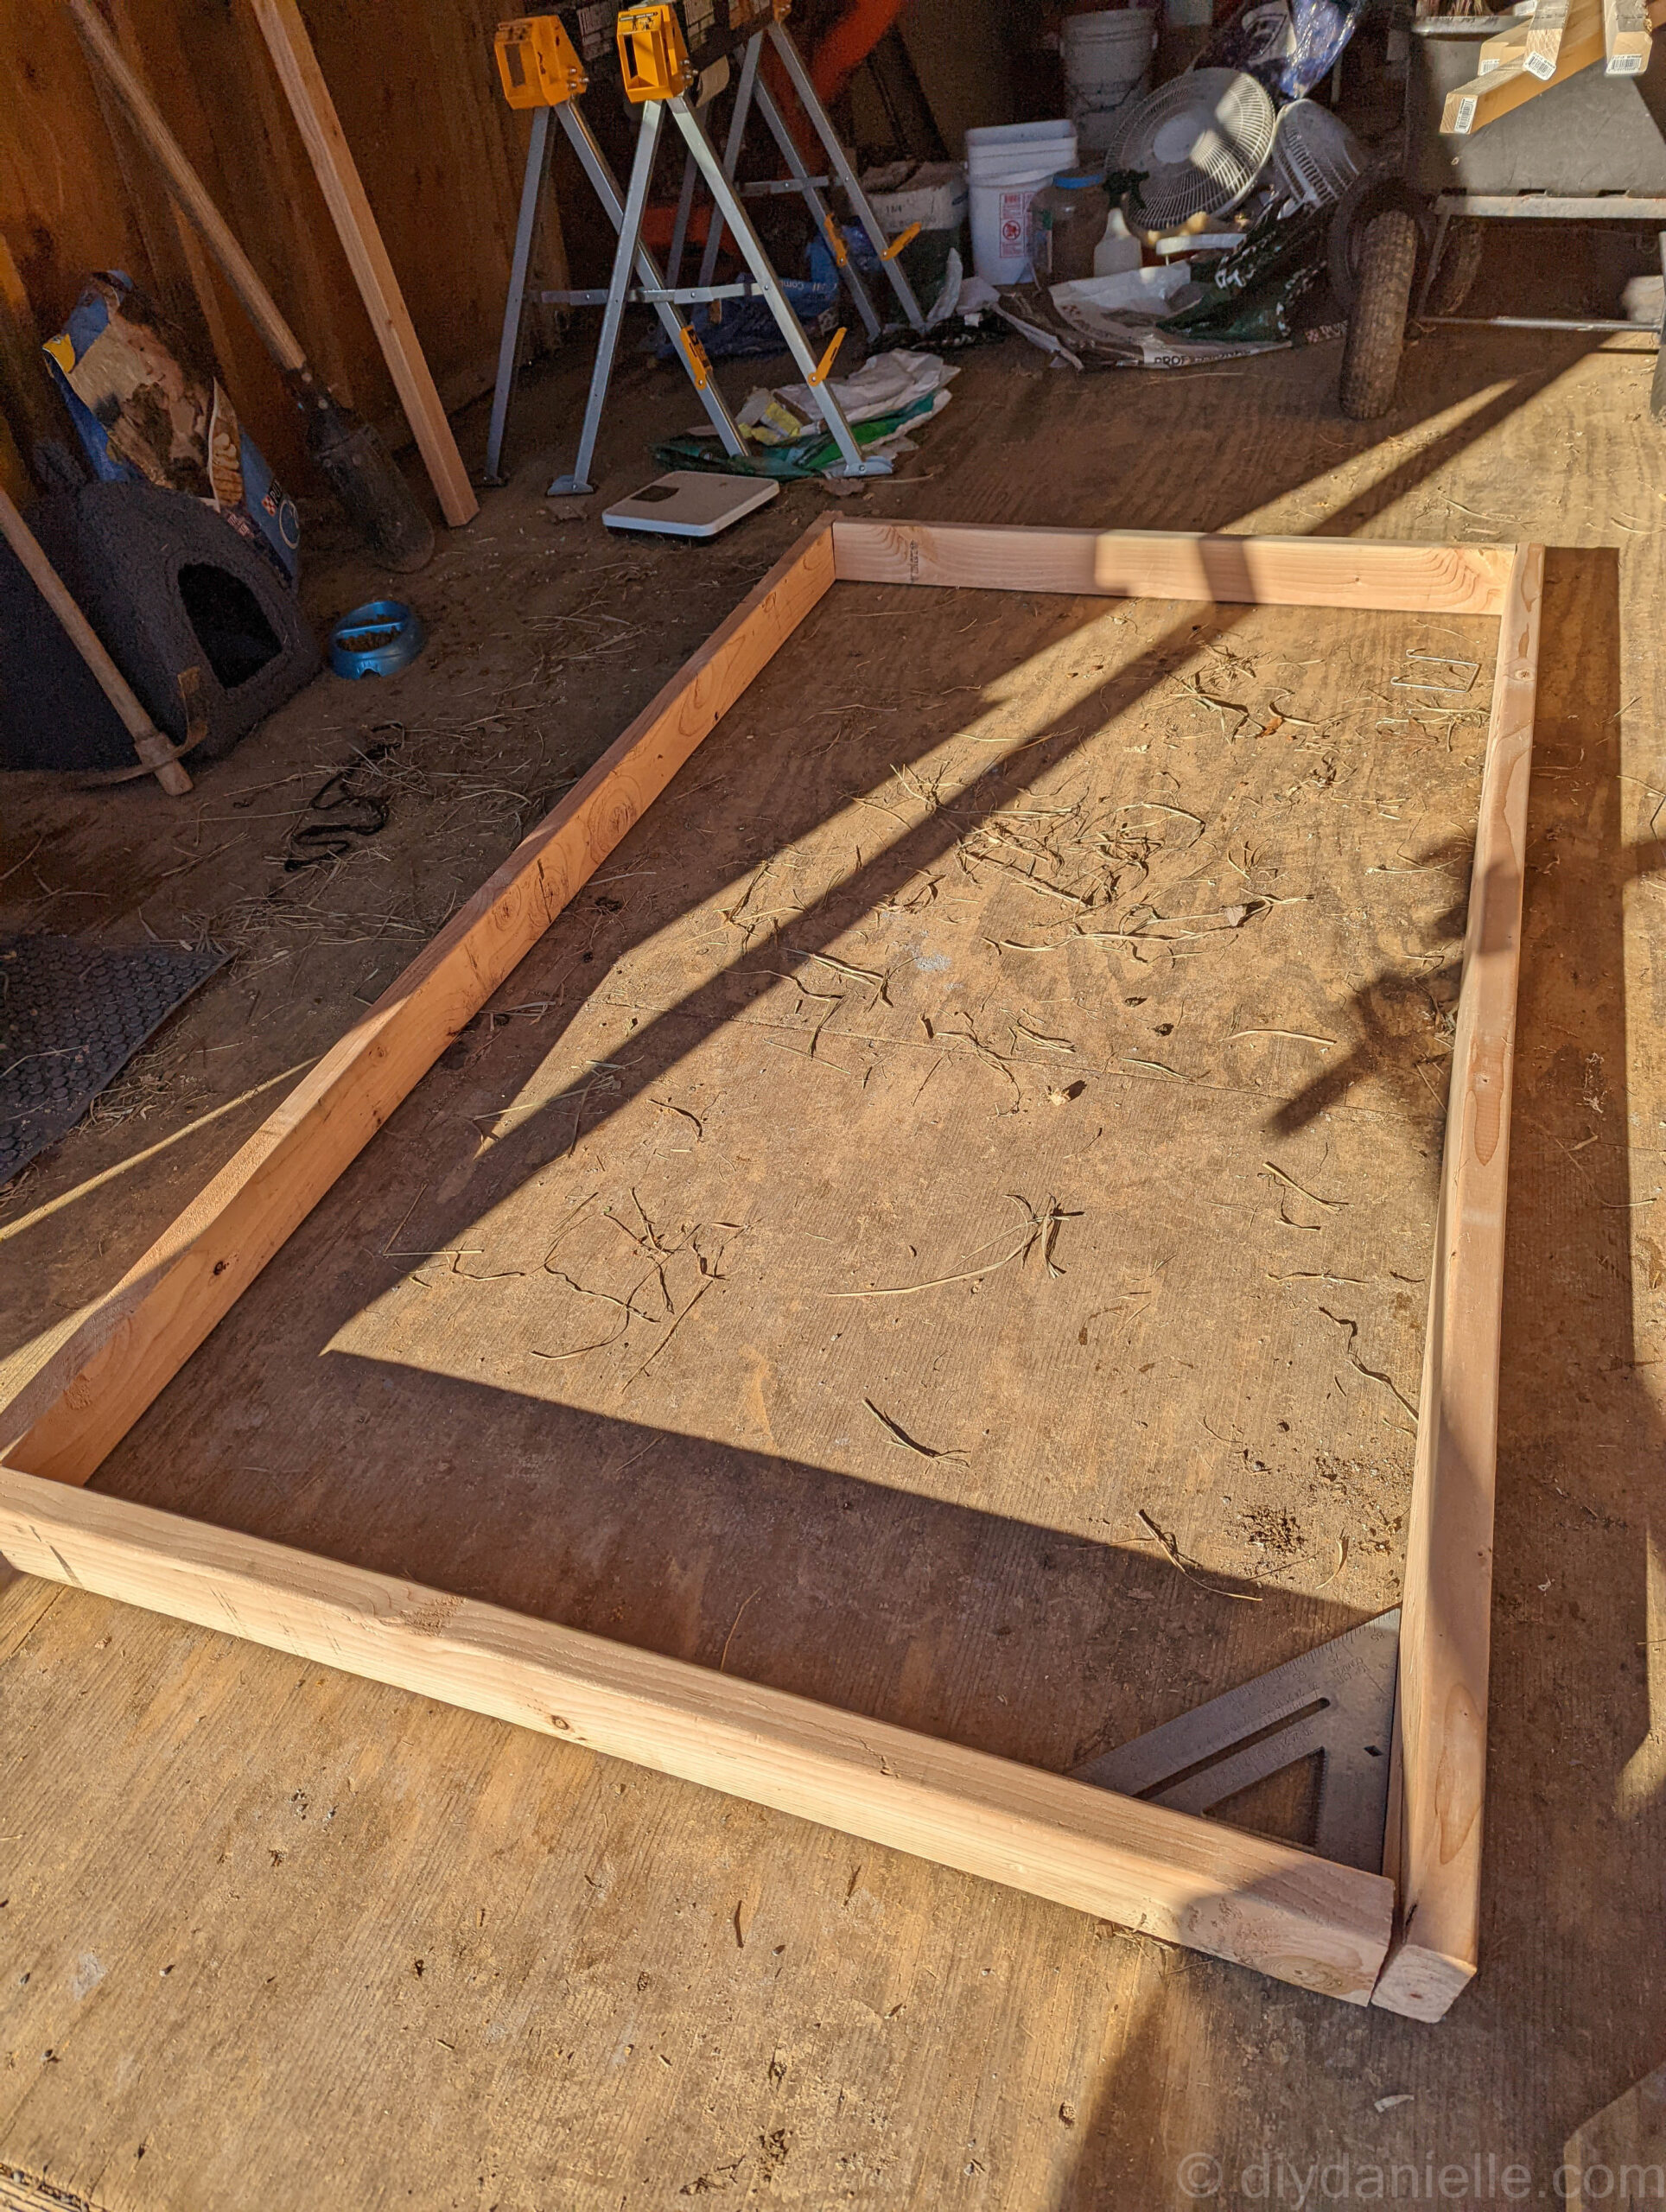 Starting to build the twin platform bed.